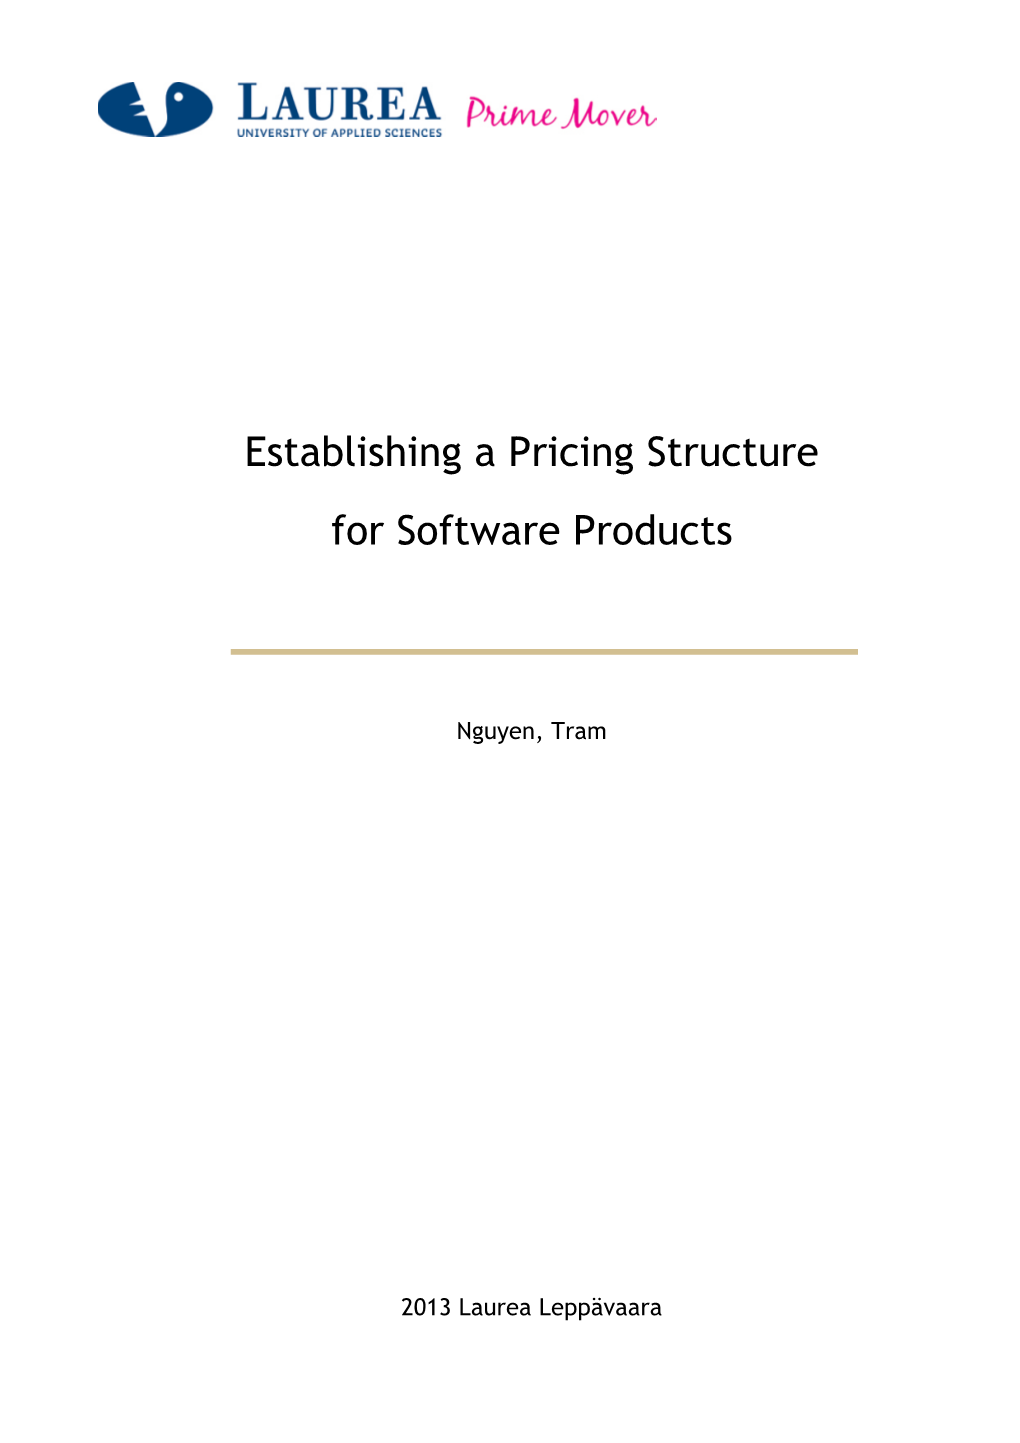 Establishing a Pricing Structure for Software Products